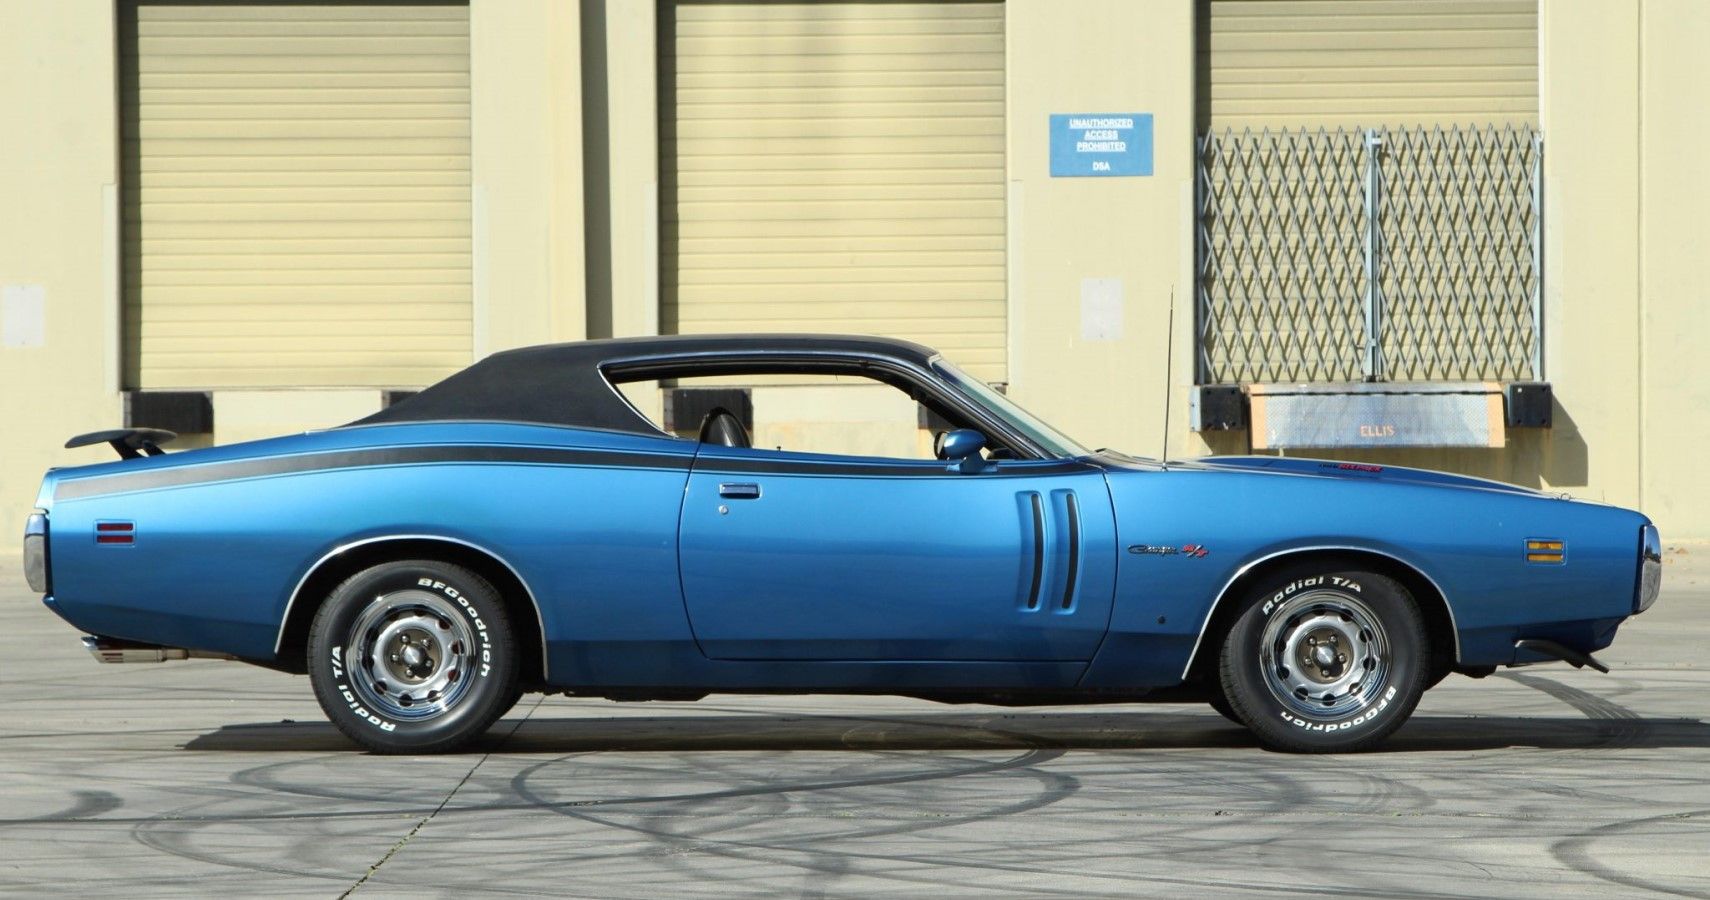 1971 Dodge Charger R/T side profile view